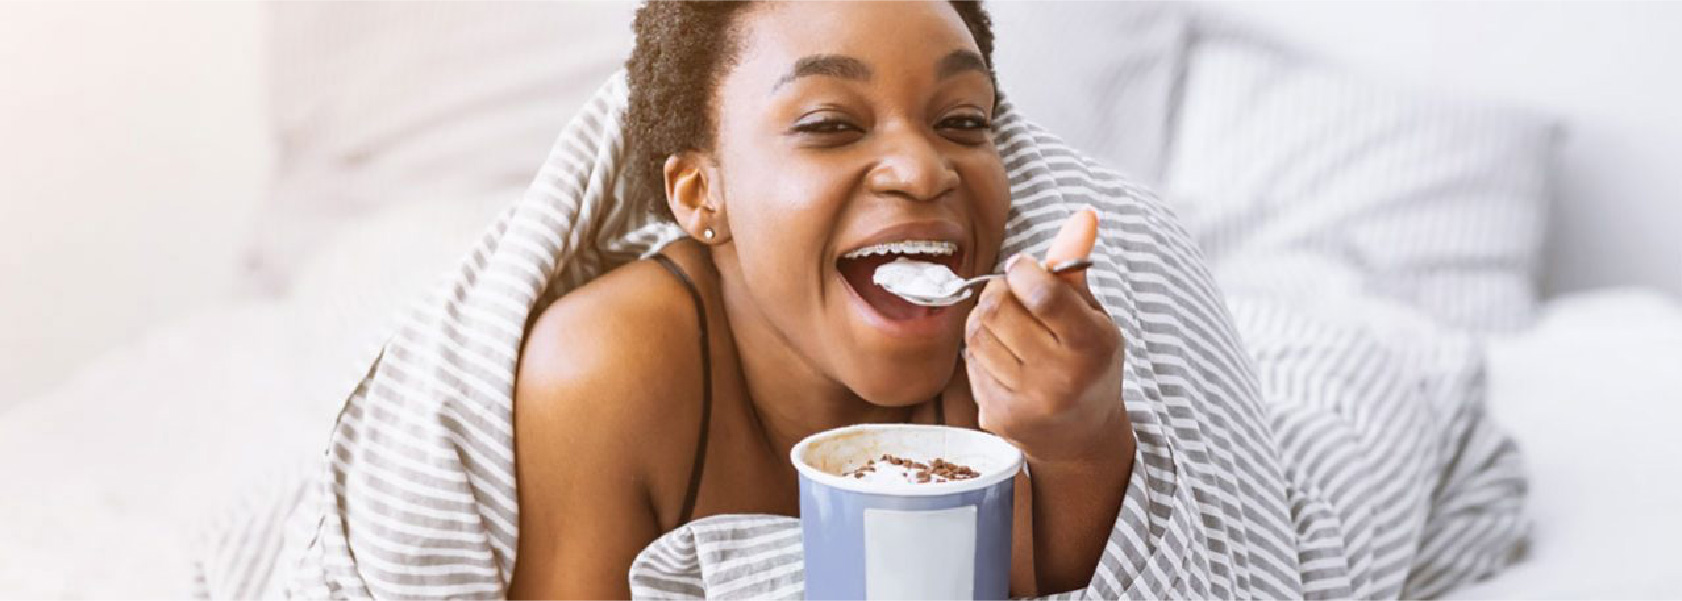  Braces-Friendly Foods. Girl Eating Ice Cream With Braces On.